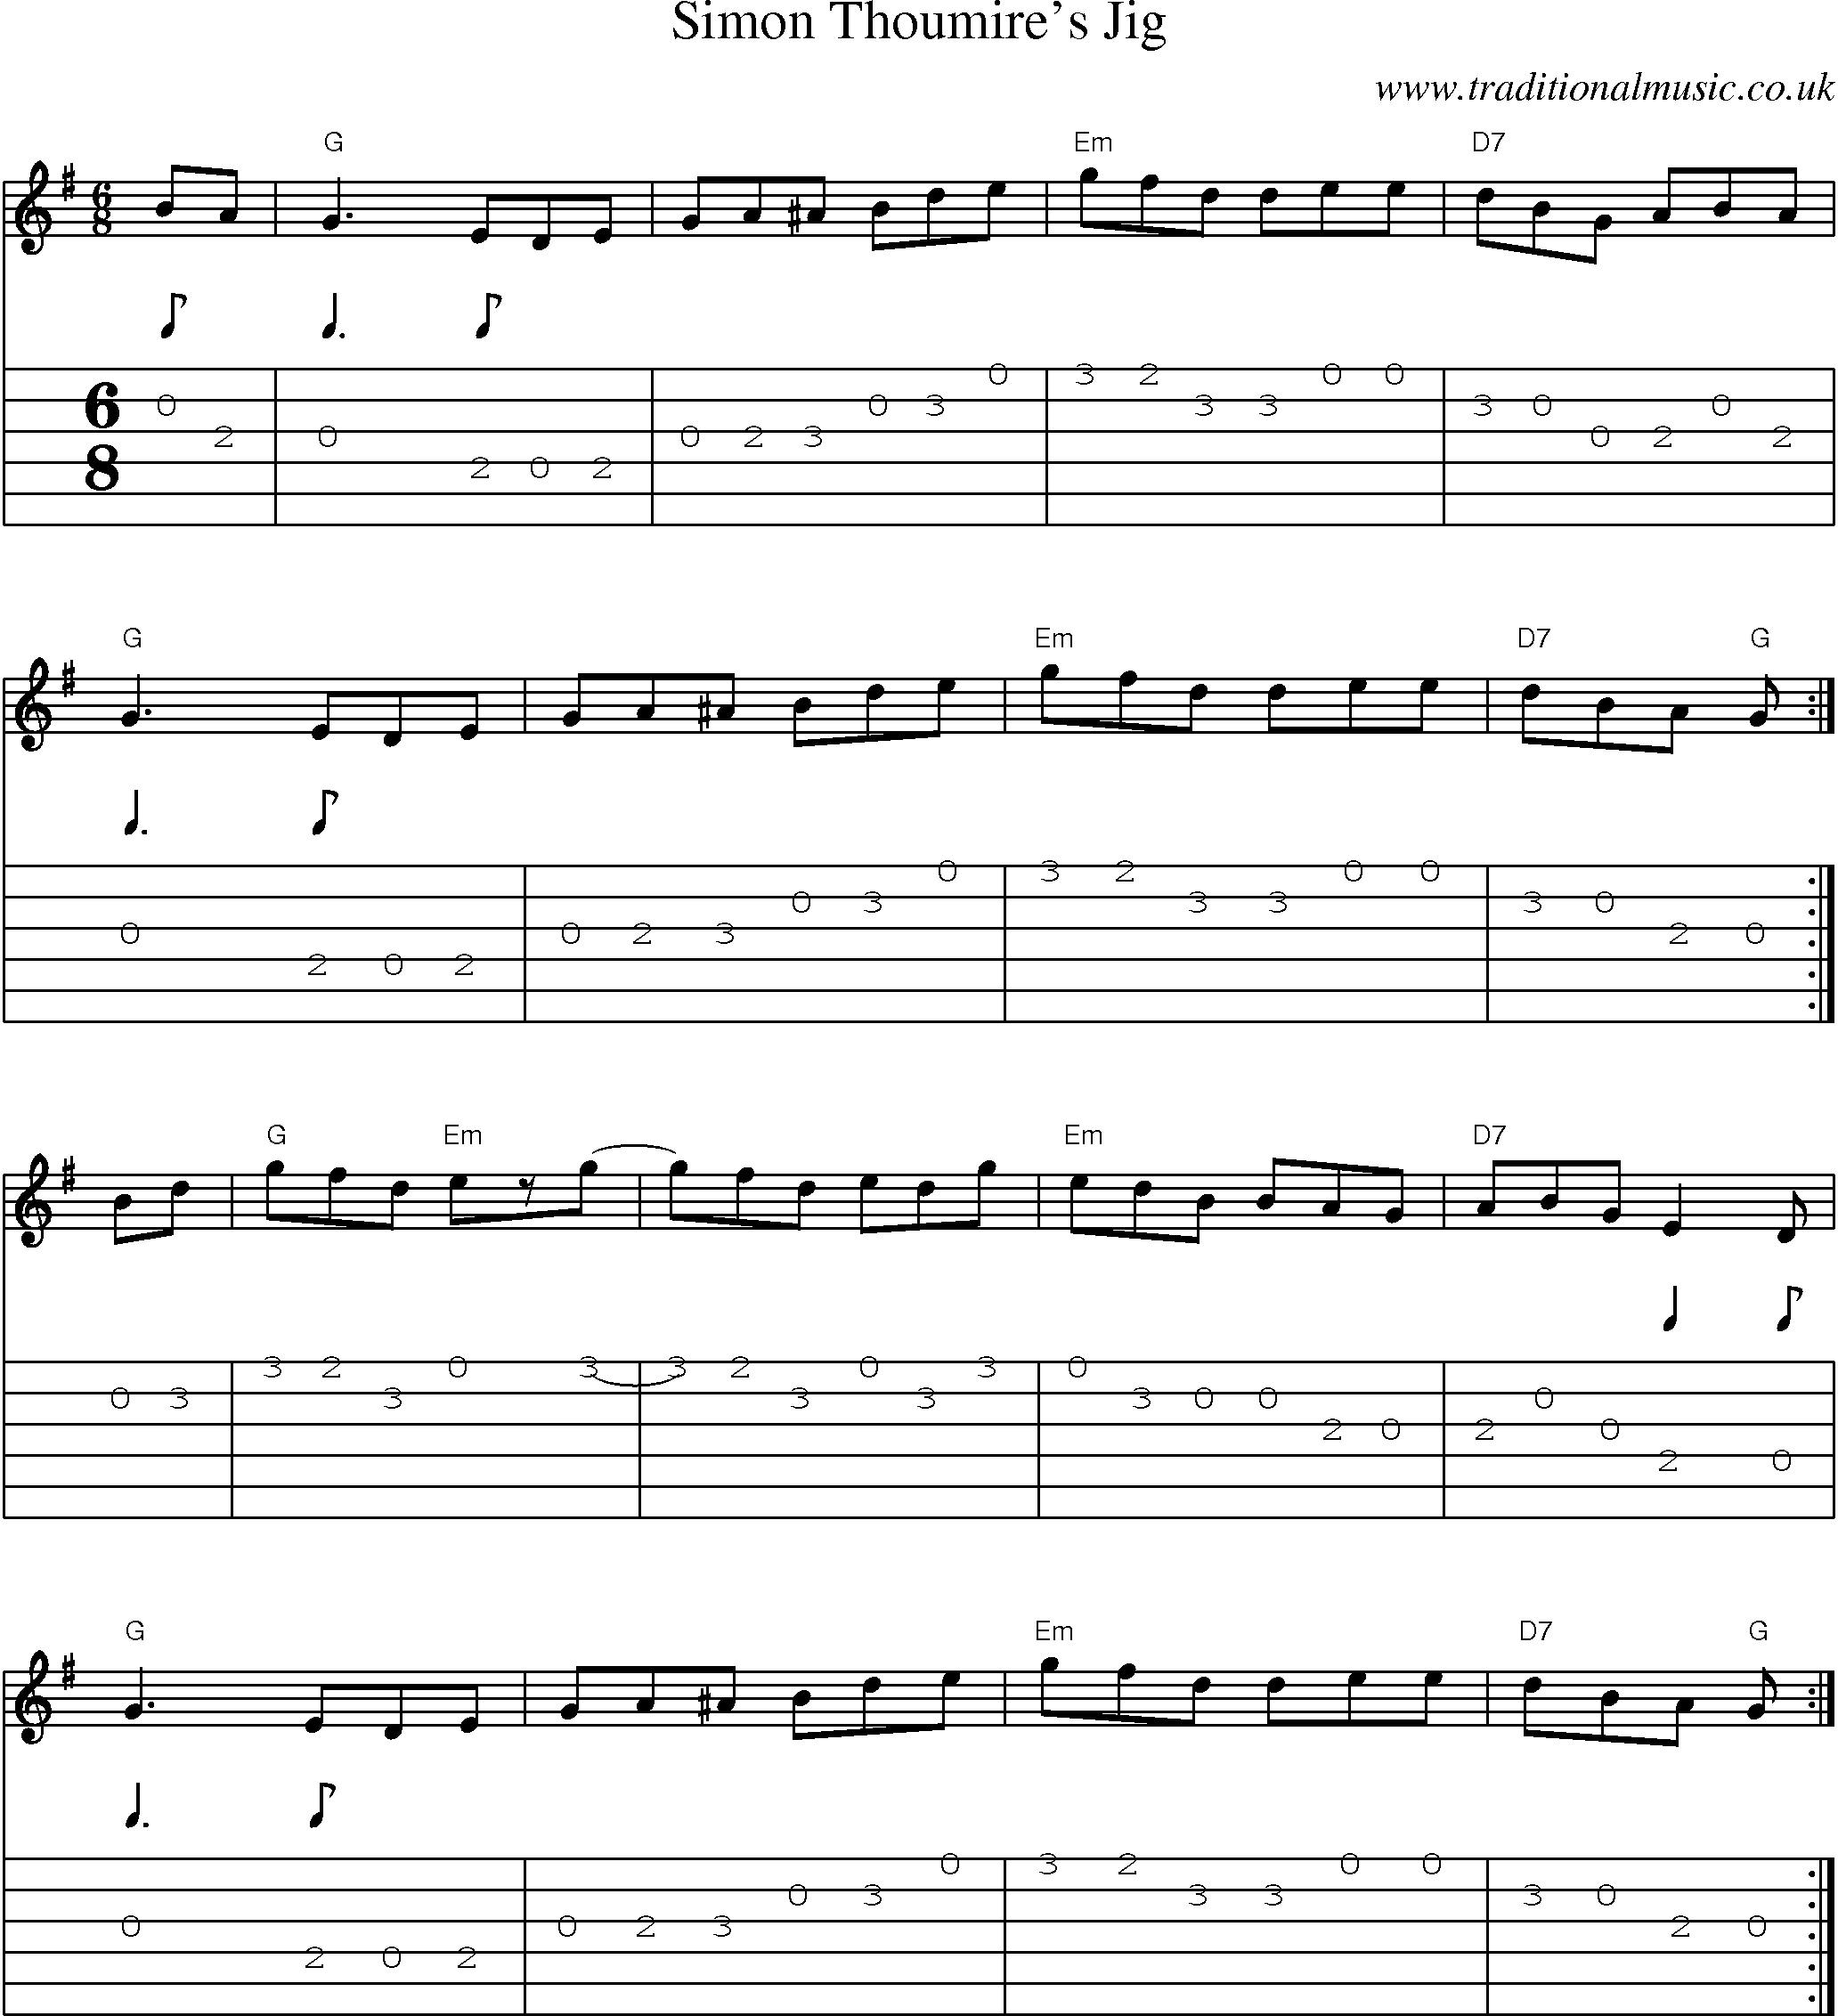 Music Score and Guitar Tabs for Simon Thoumires Jig